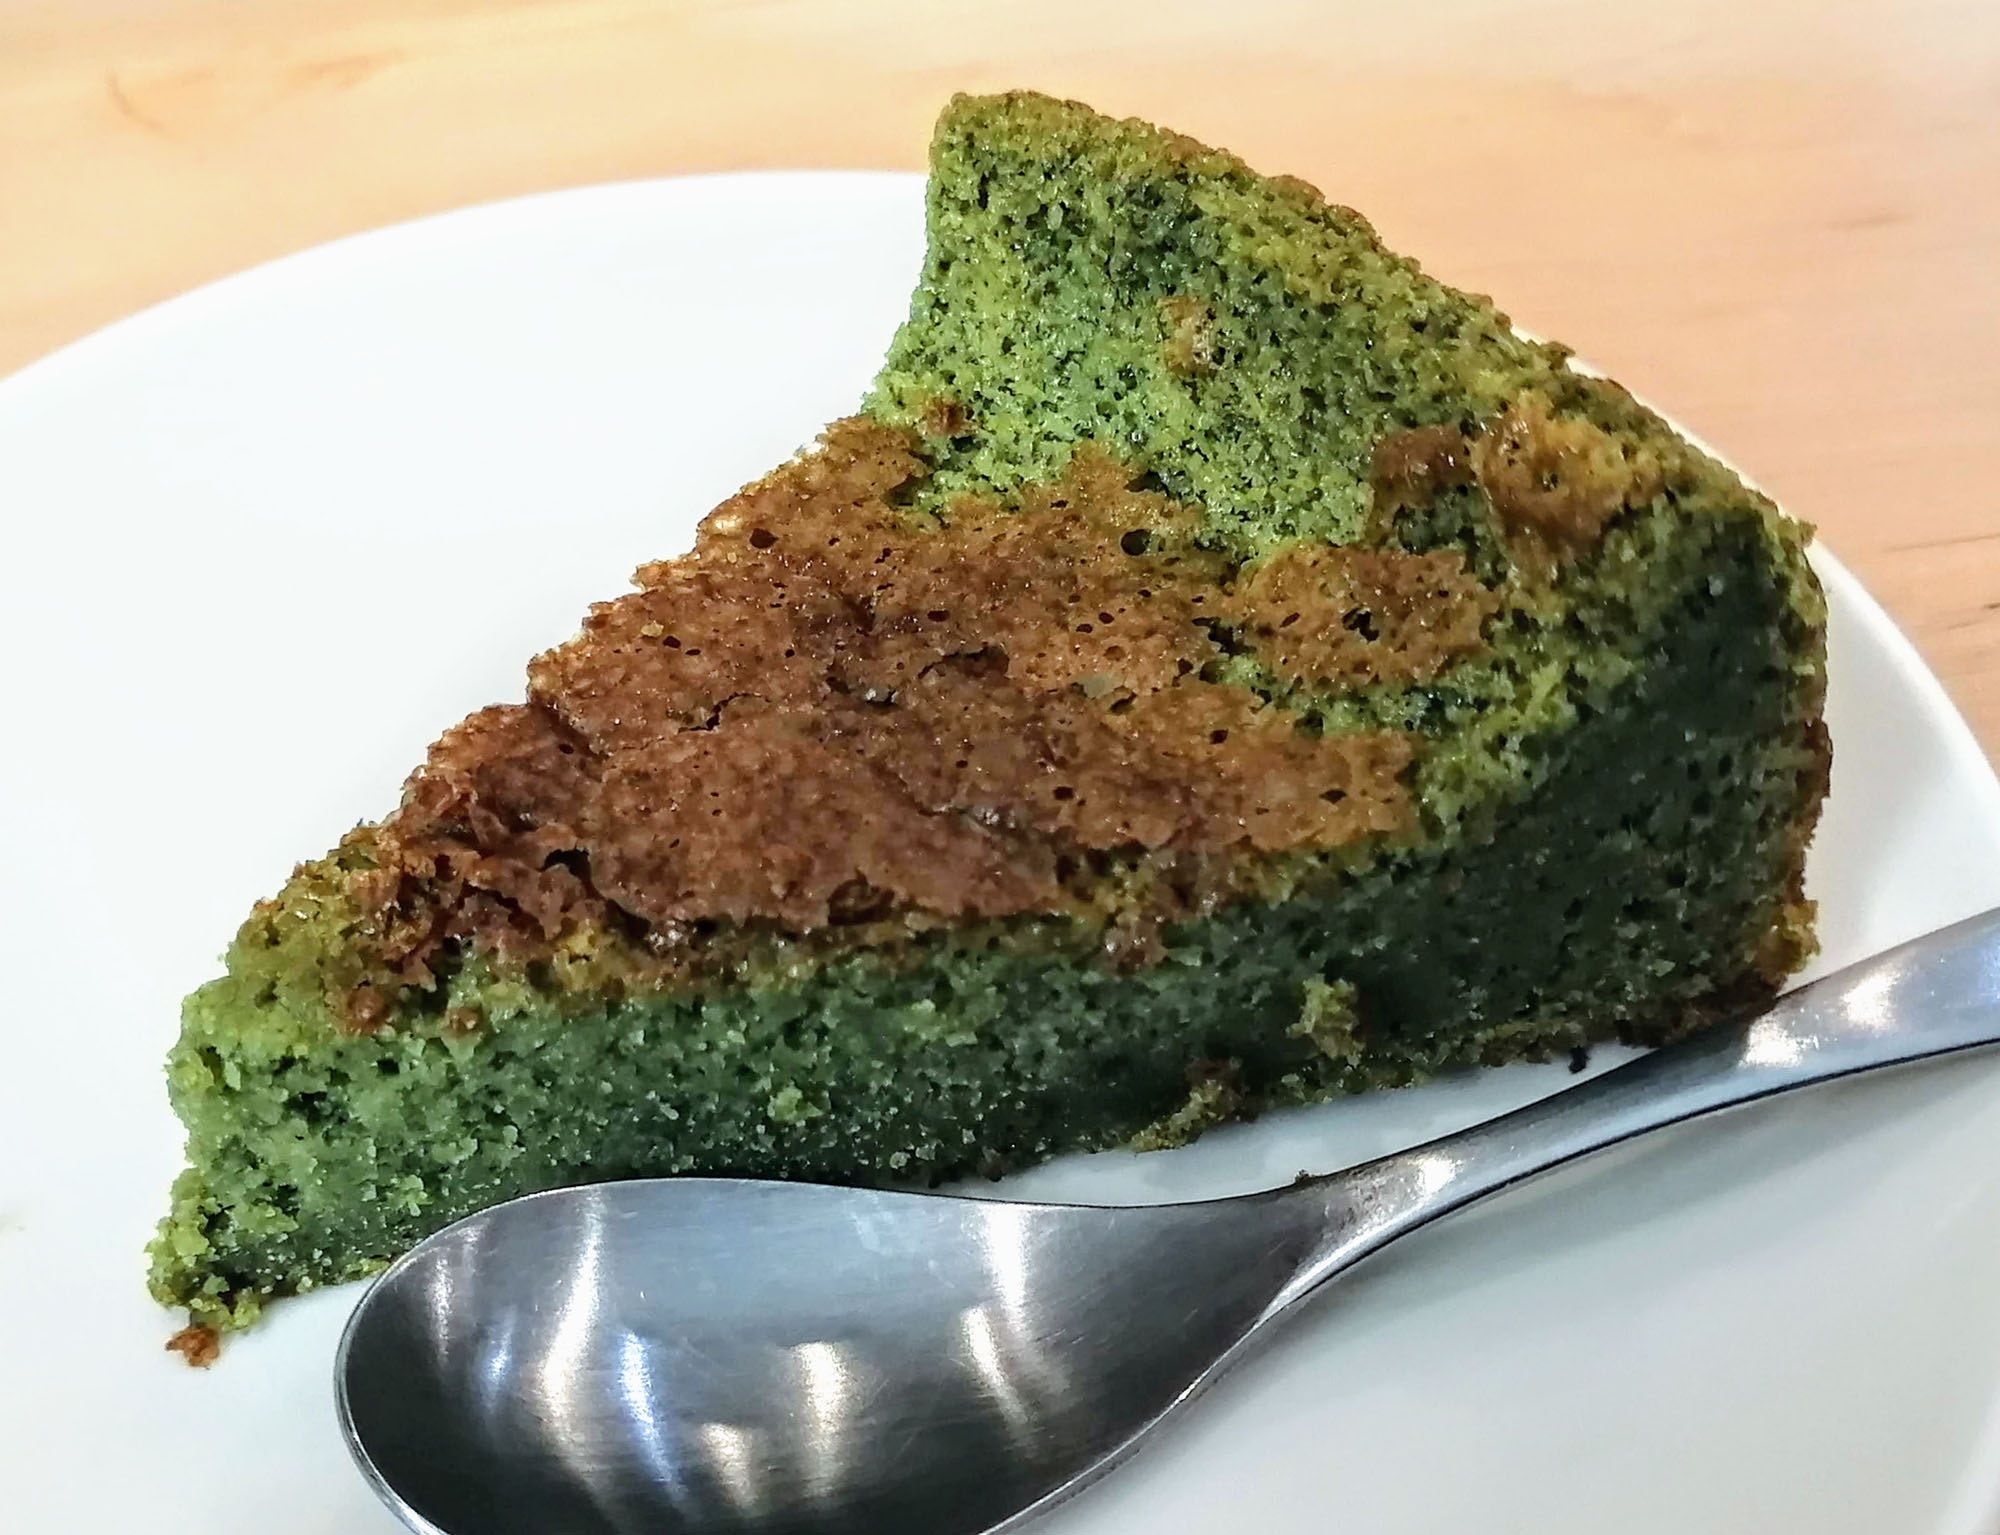  A close-up of a triangular slice of green and brown cake on a white plate with a spoon. Photo by Paul Young.